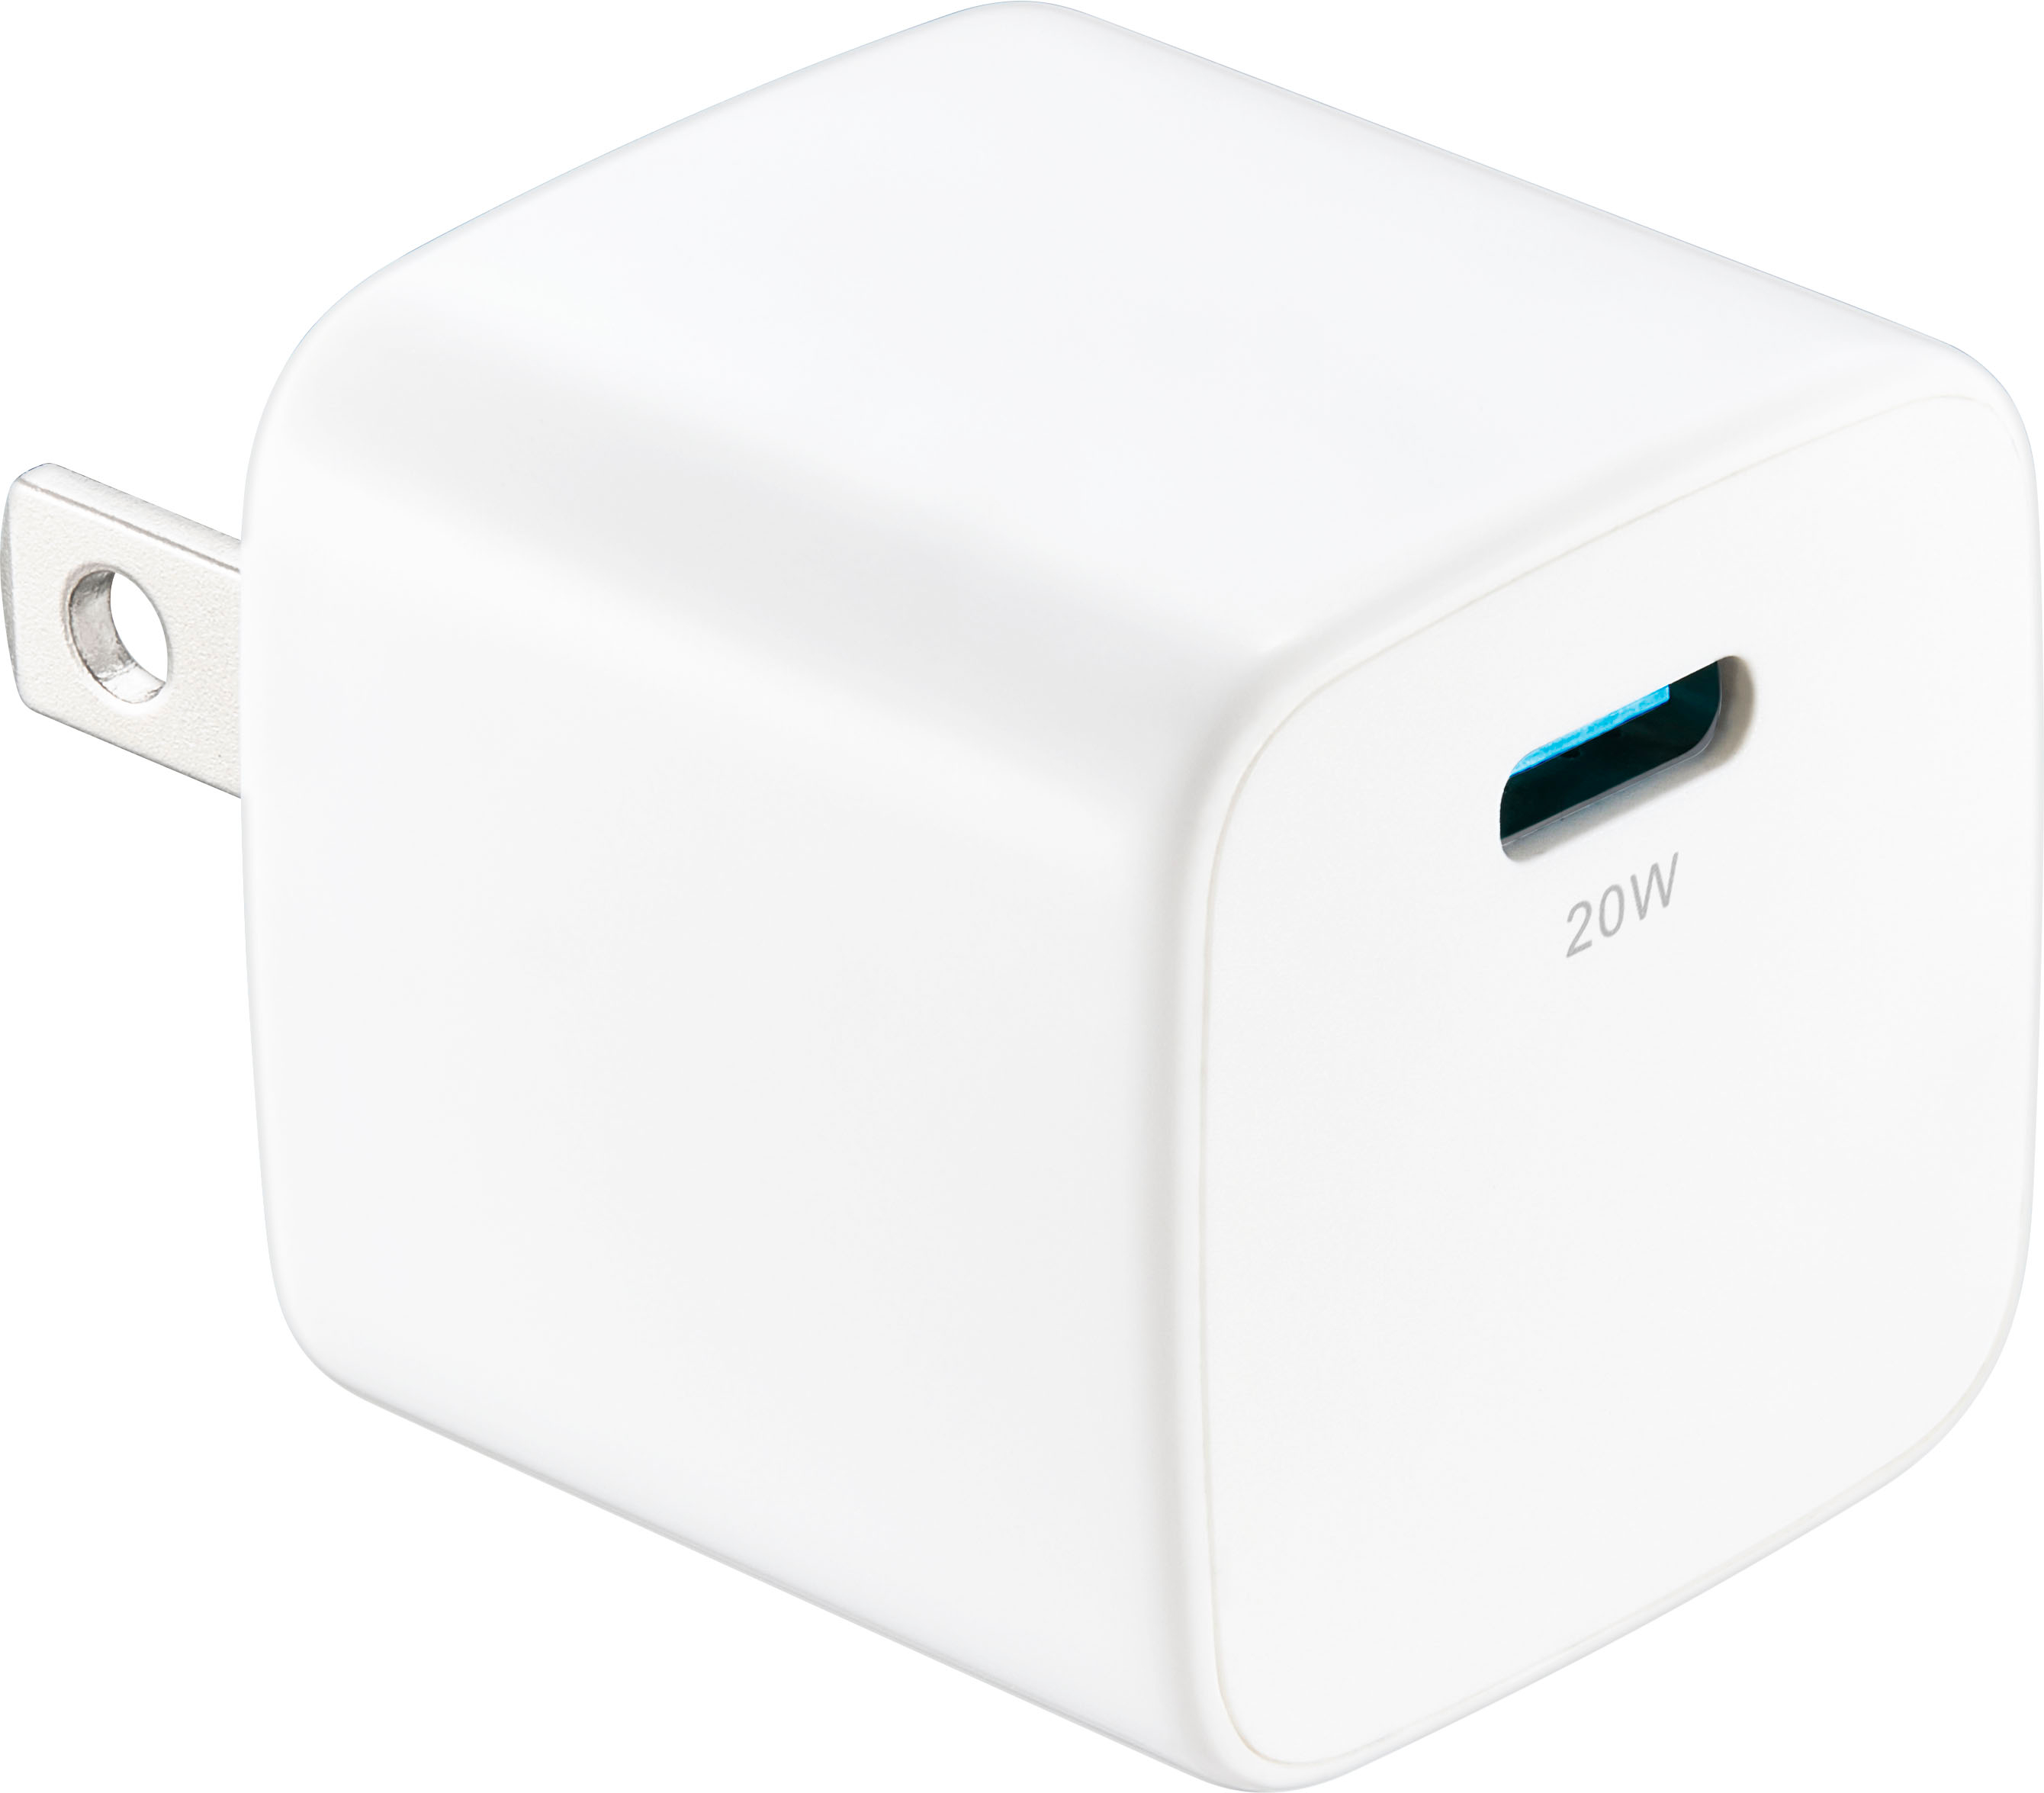 Insignia™ 20 W USB-C Wall Charger White NS-MWC20W1W - Best Buy